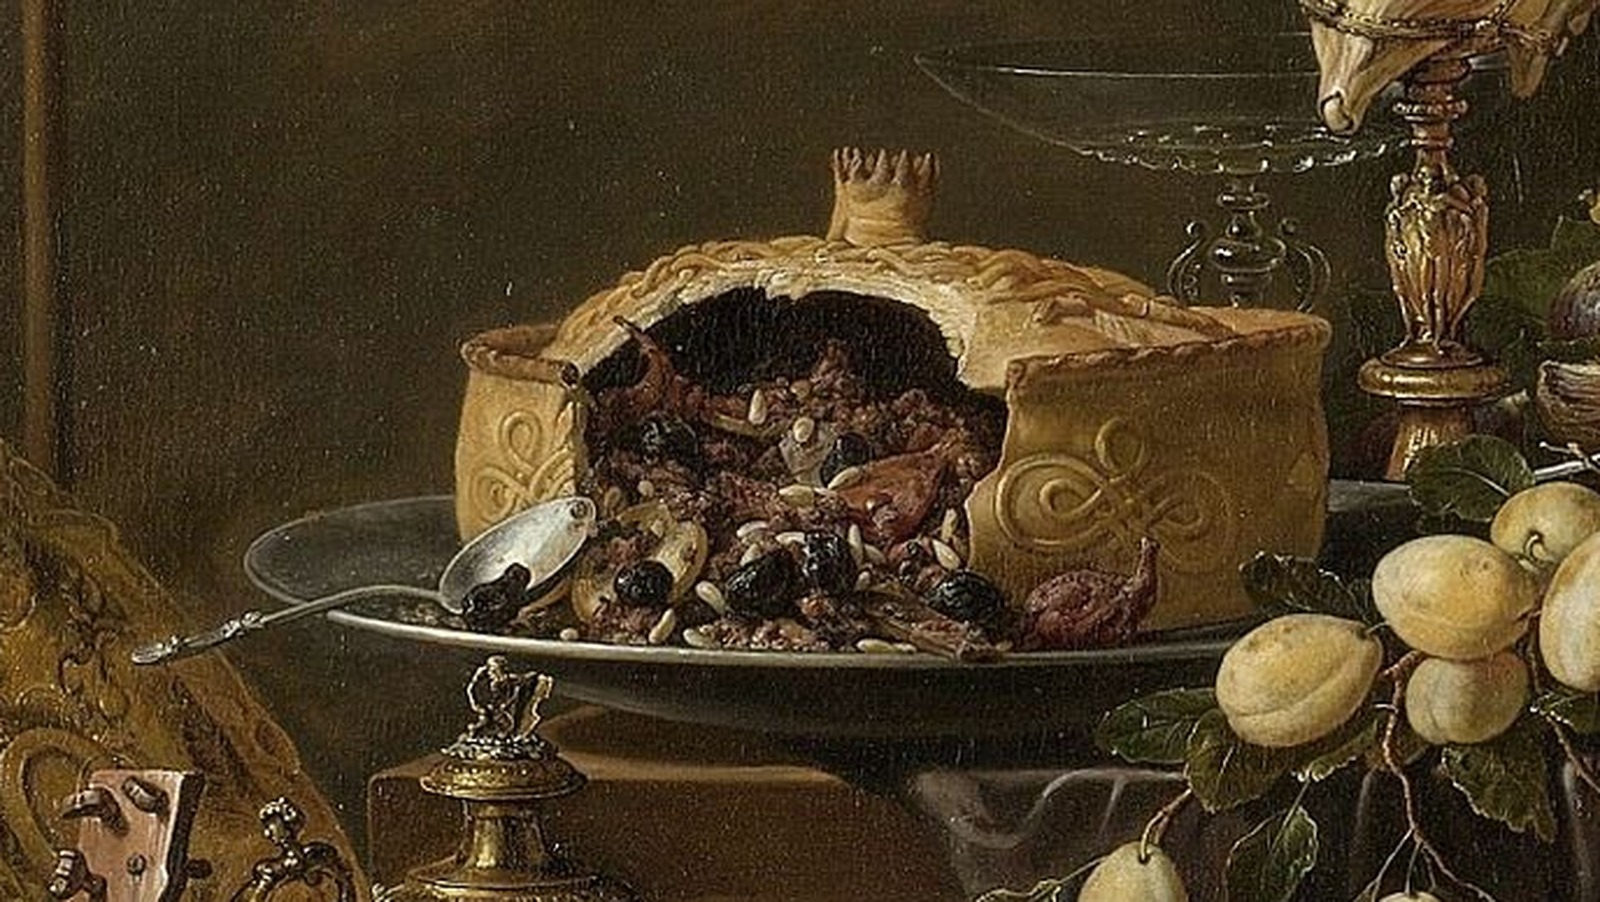 Pastry wasn't really meant to be eaten in the 16th century